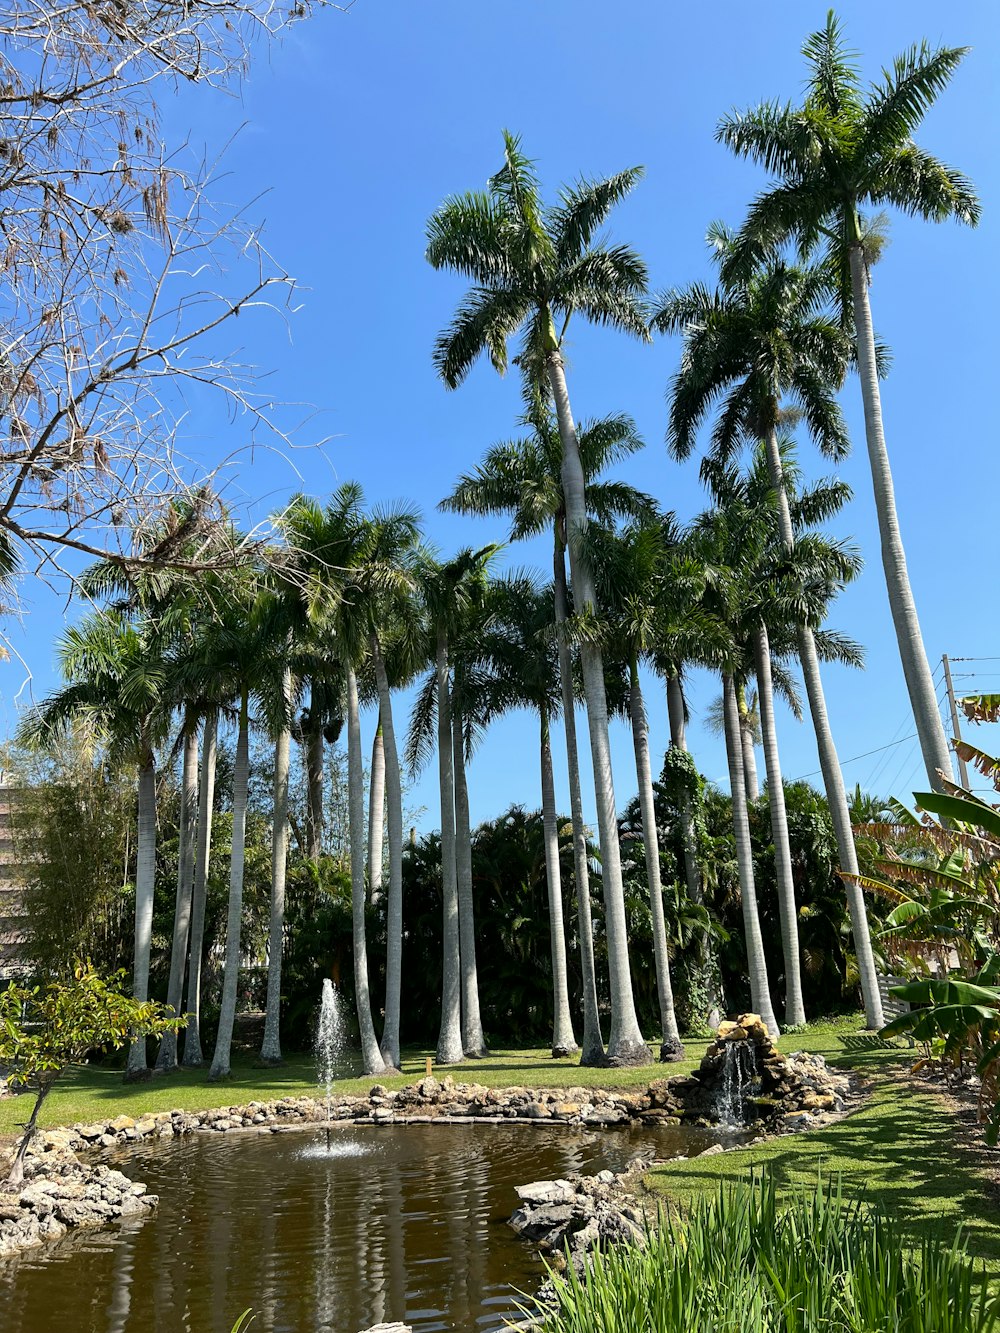 a pond surrounded by palm trees in a park